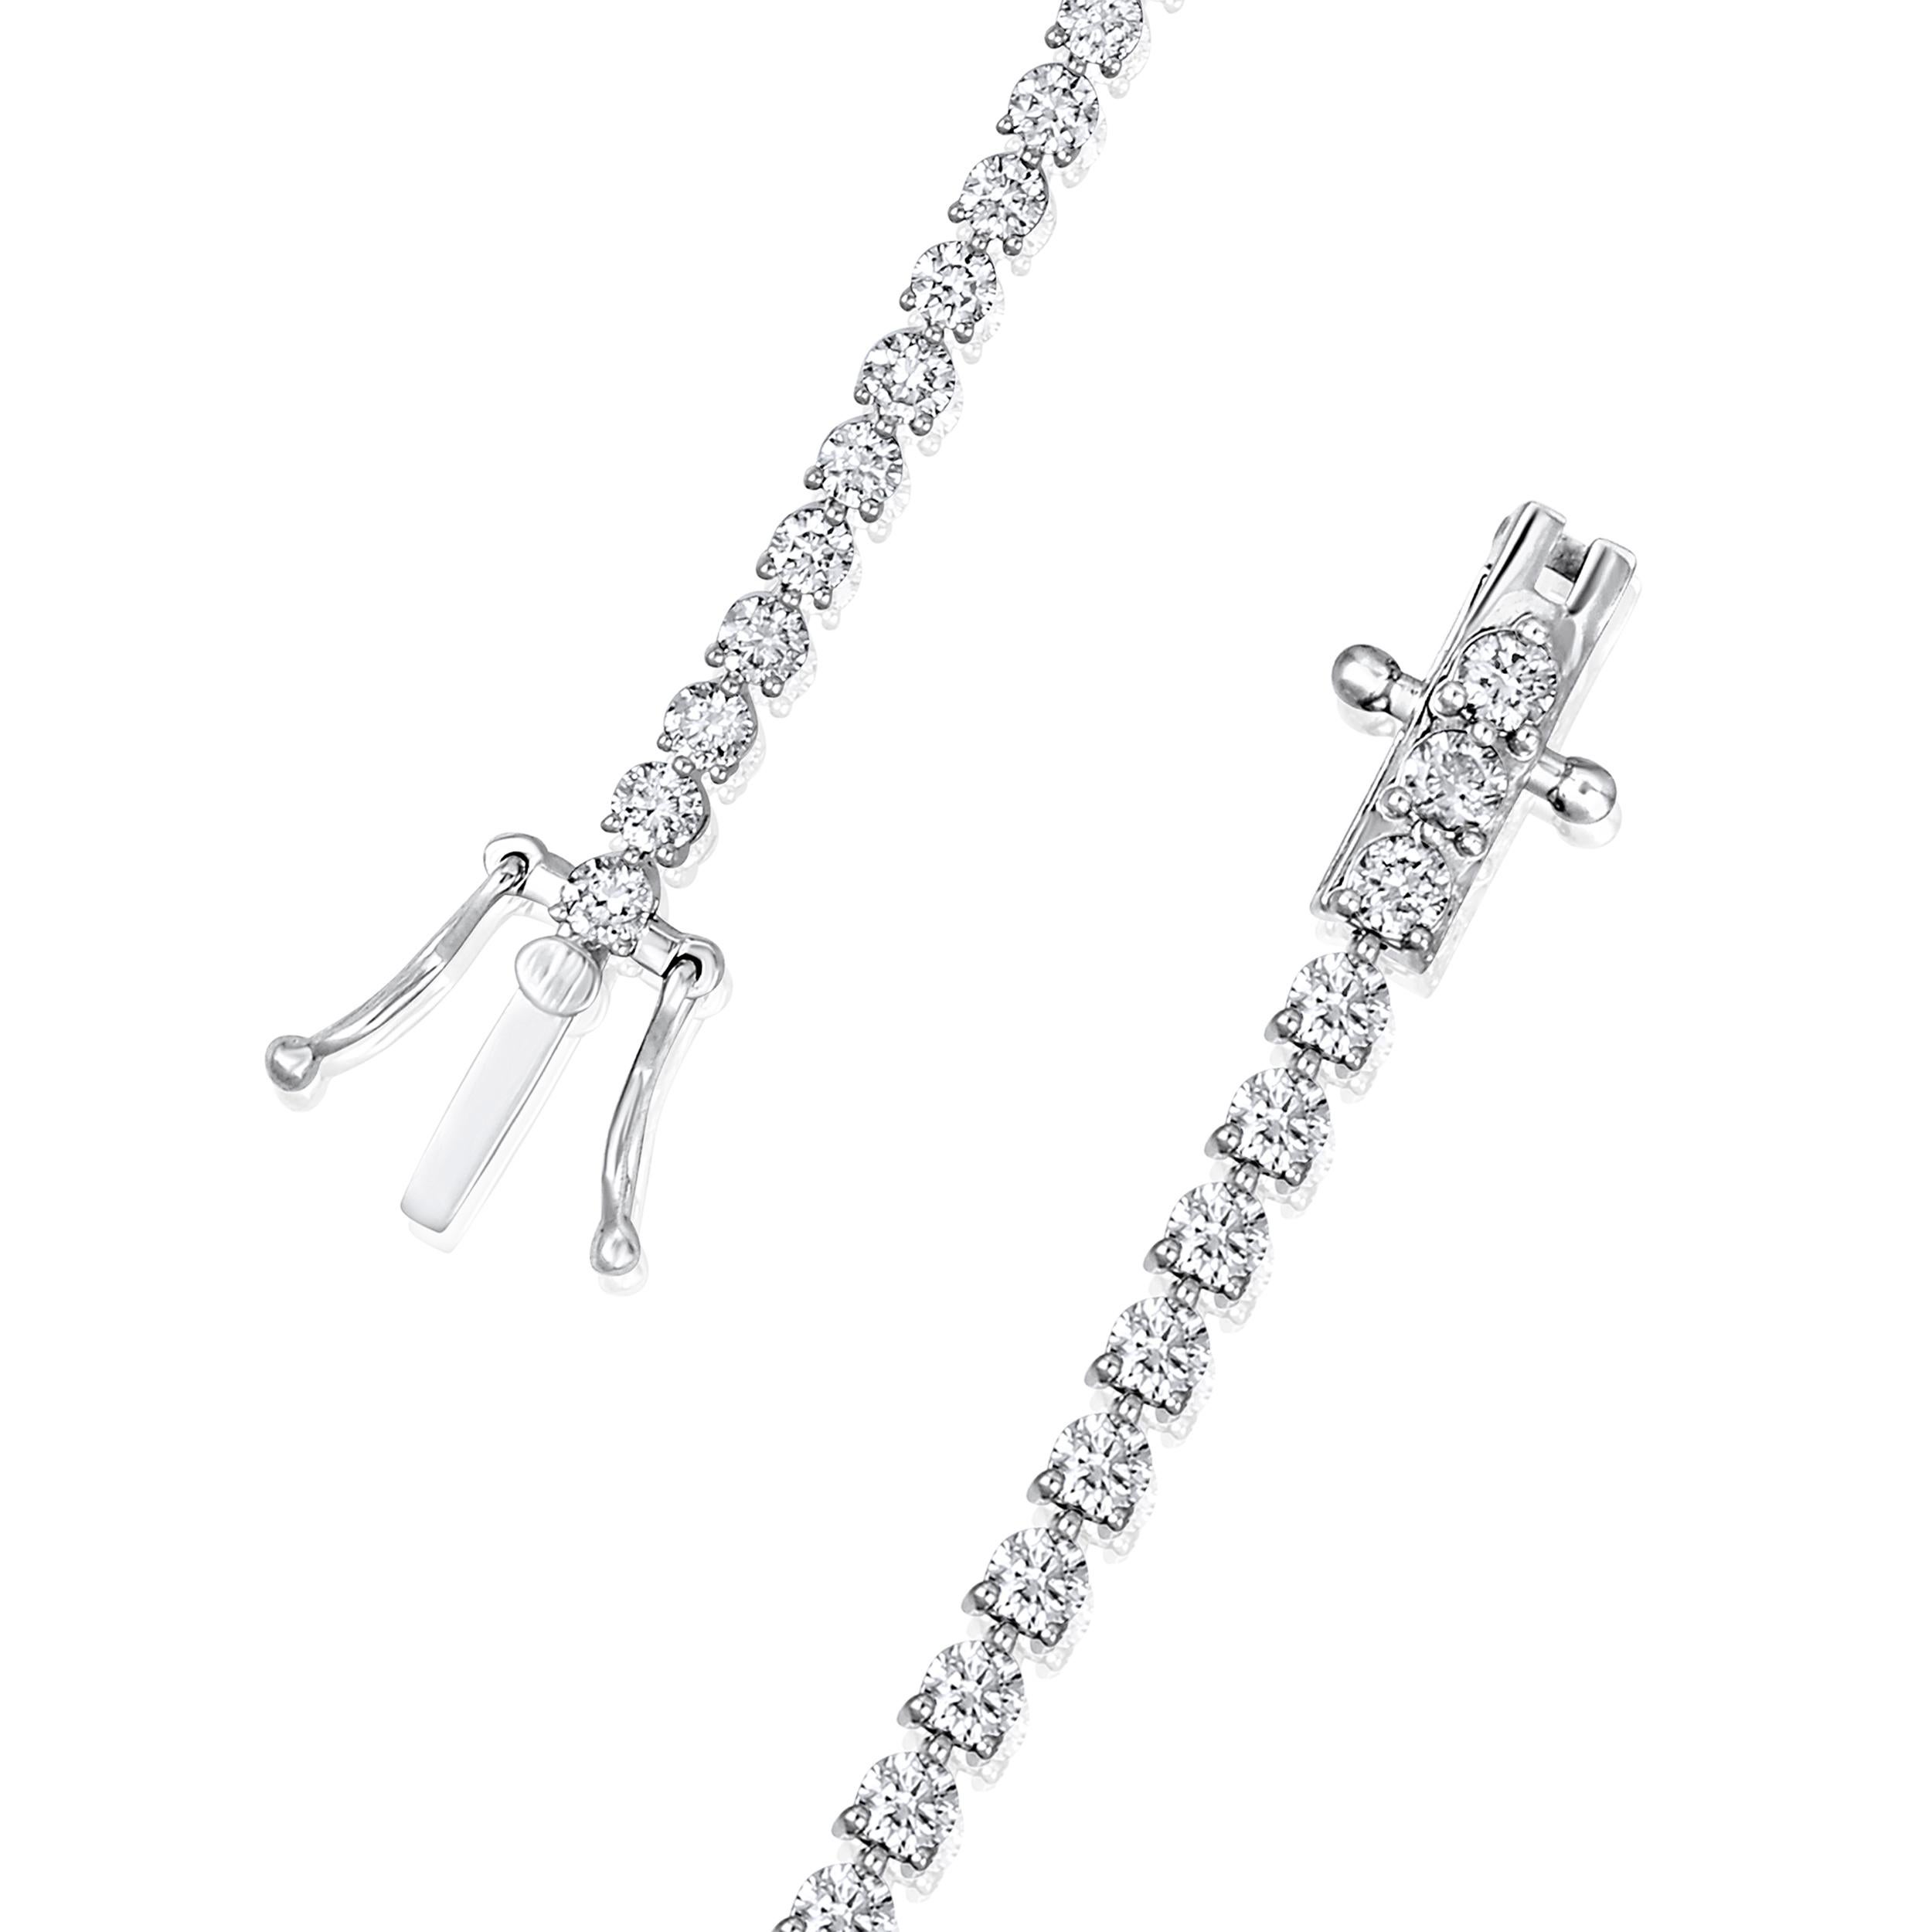 Crafted in 7.7 grams of 14K White Gold, the bracelet contains 66 stones of Round Diamonds with a total of 3 carat in G-H color and VS-SI carat. The bracelet length is 7 inches.

This jewelry piece will be expertly crafted by our skilled artisans